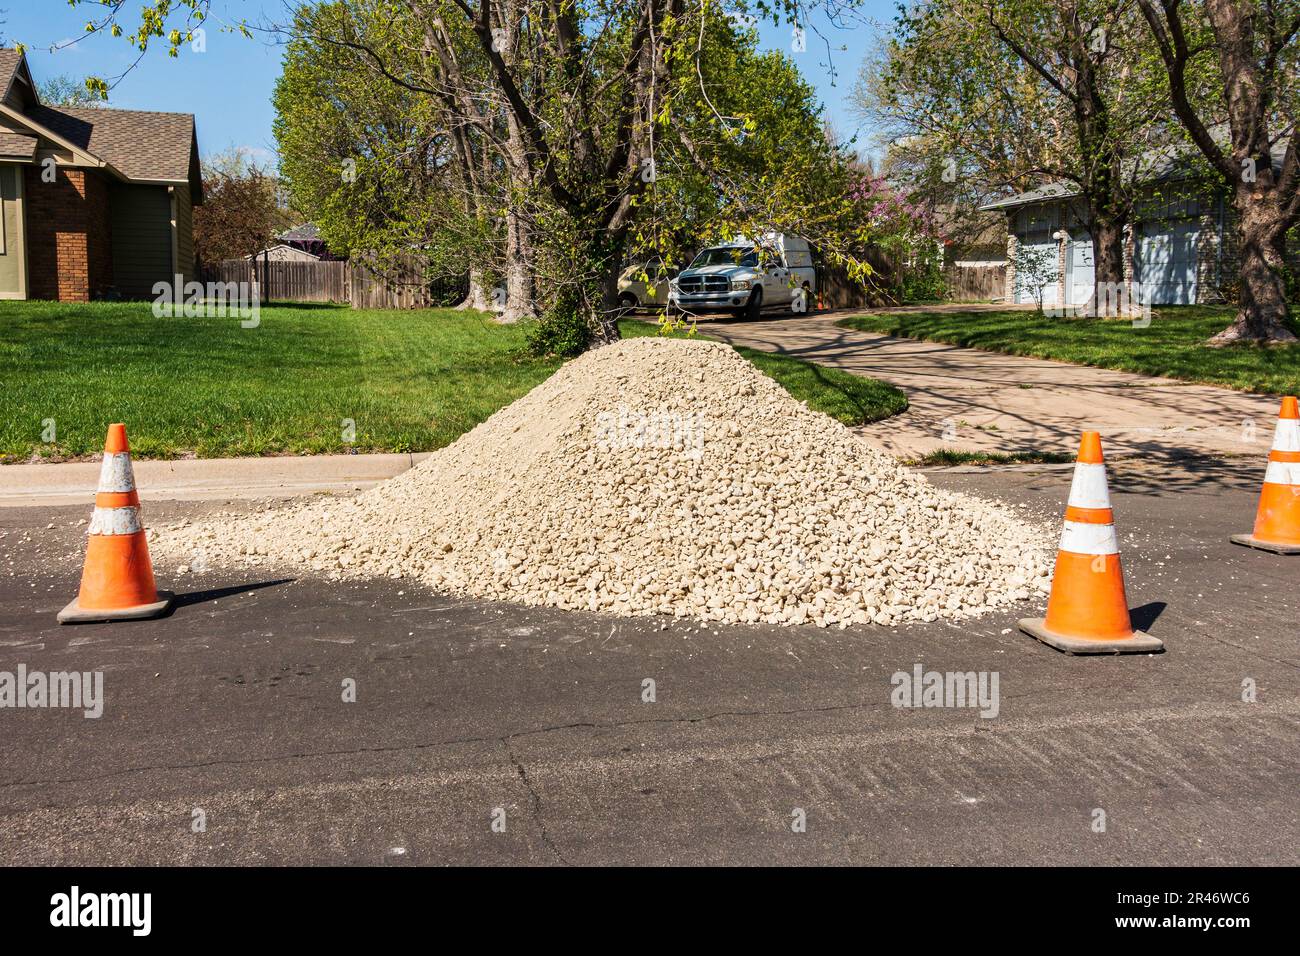 A pile of rocks for landscaping or construction in the street with orange traffic cones marking it off. Kansas, USA. Stock Photo